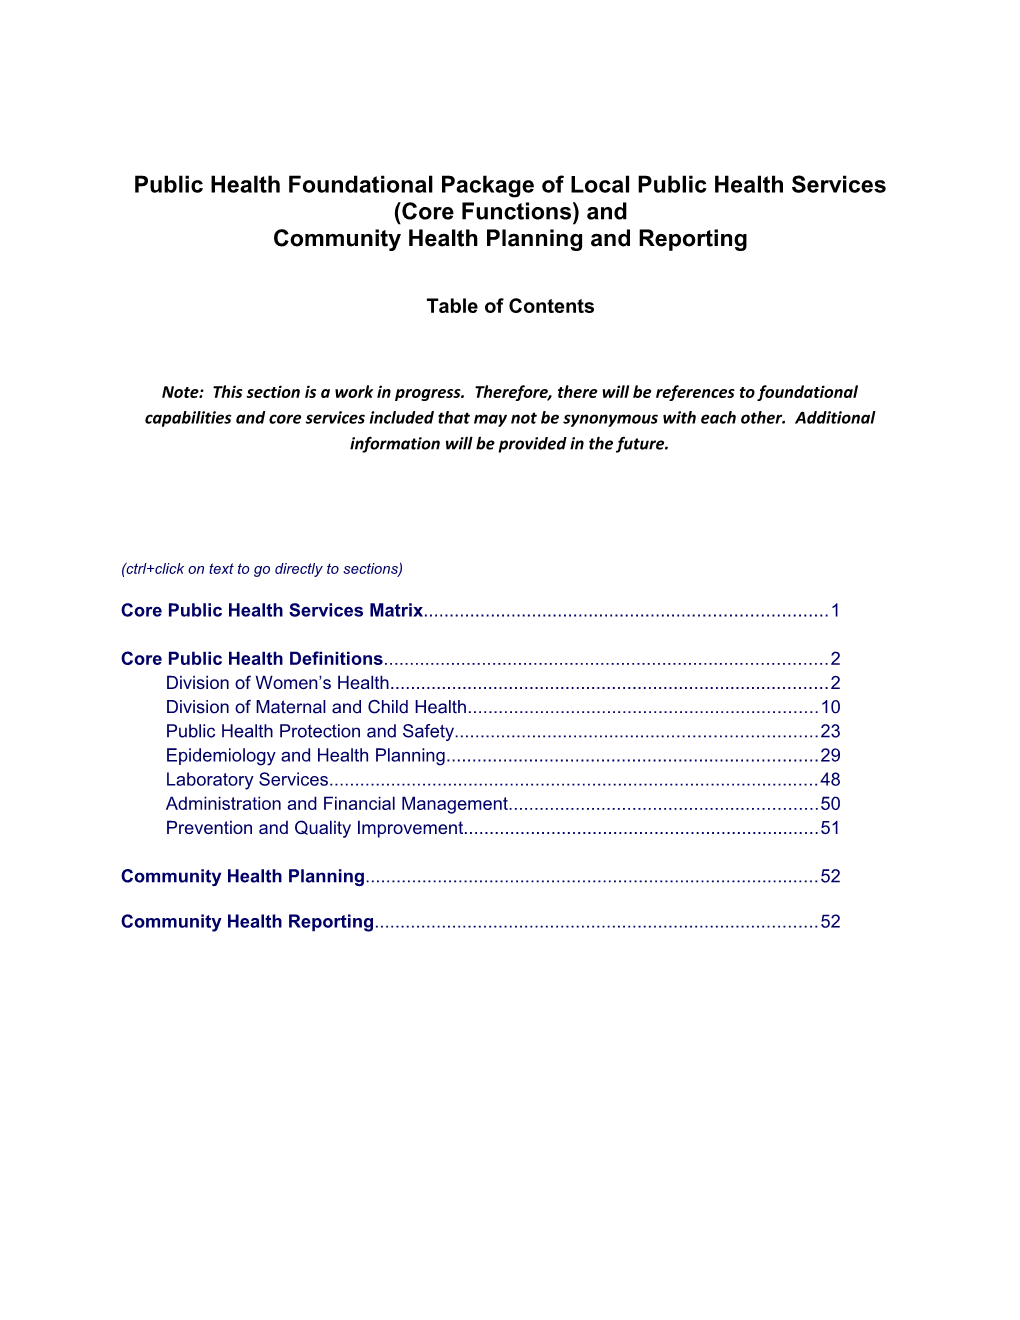 Public Health Foundational Package of Local Public Health Services (Core Functions) And